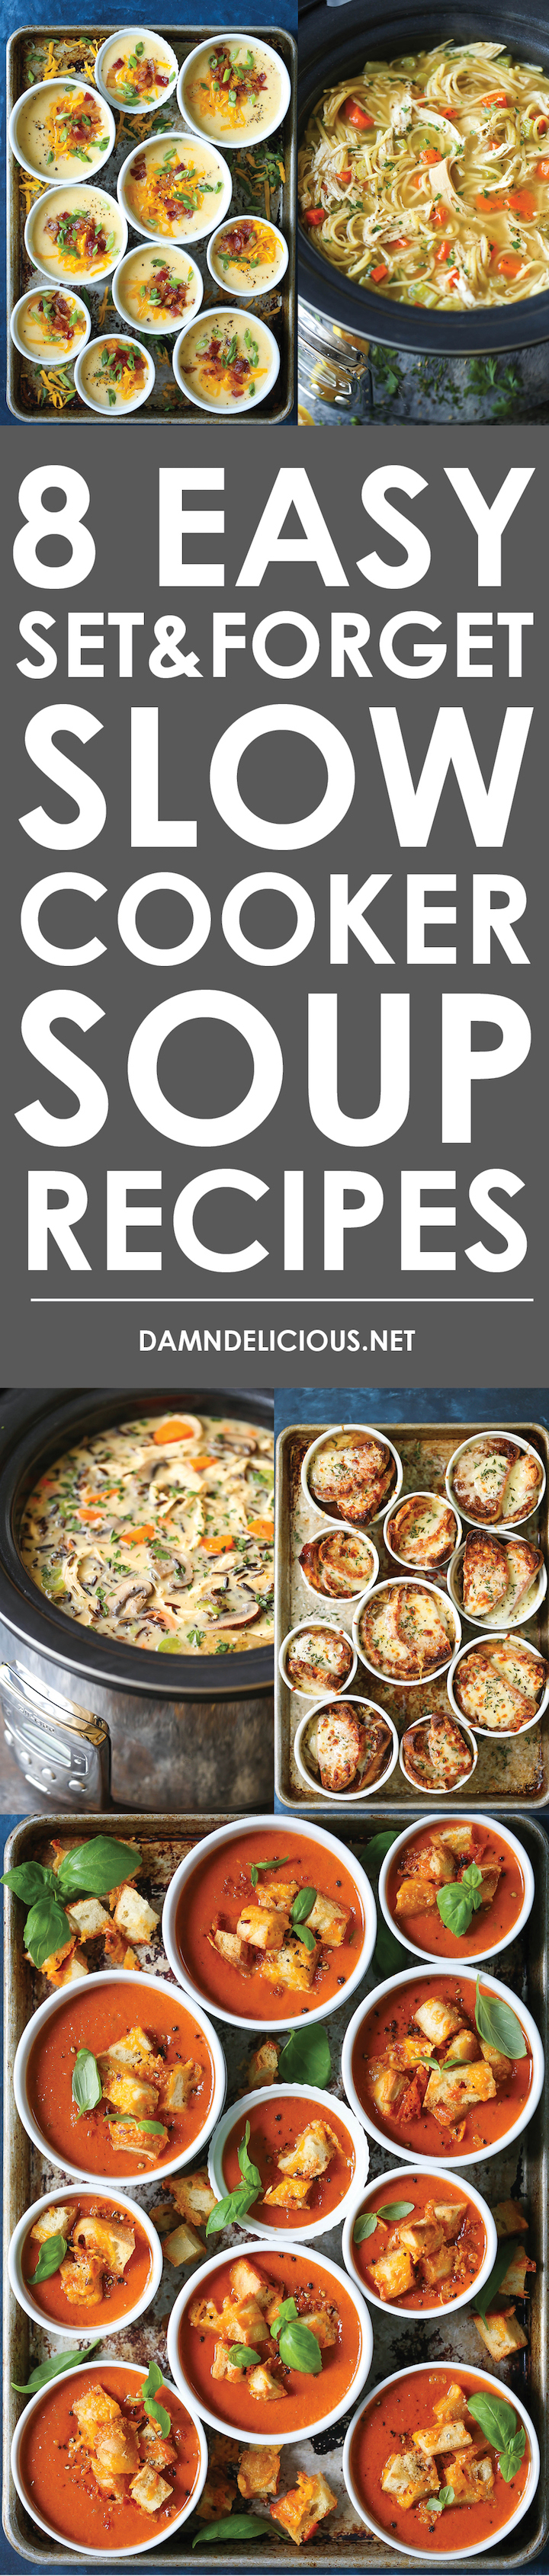 8 Easy Set and Forget Slow Cooker Soup Recipes - Damn Delicious